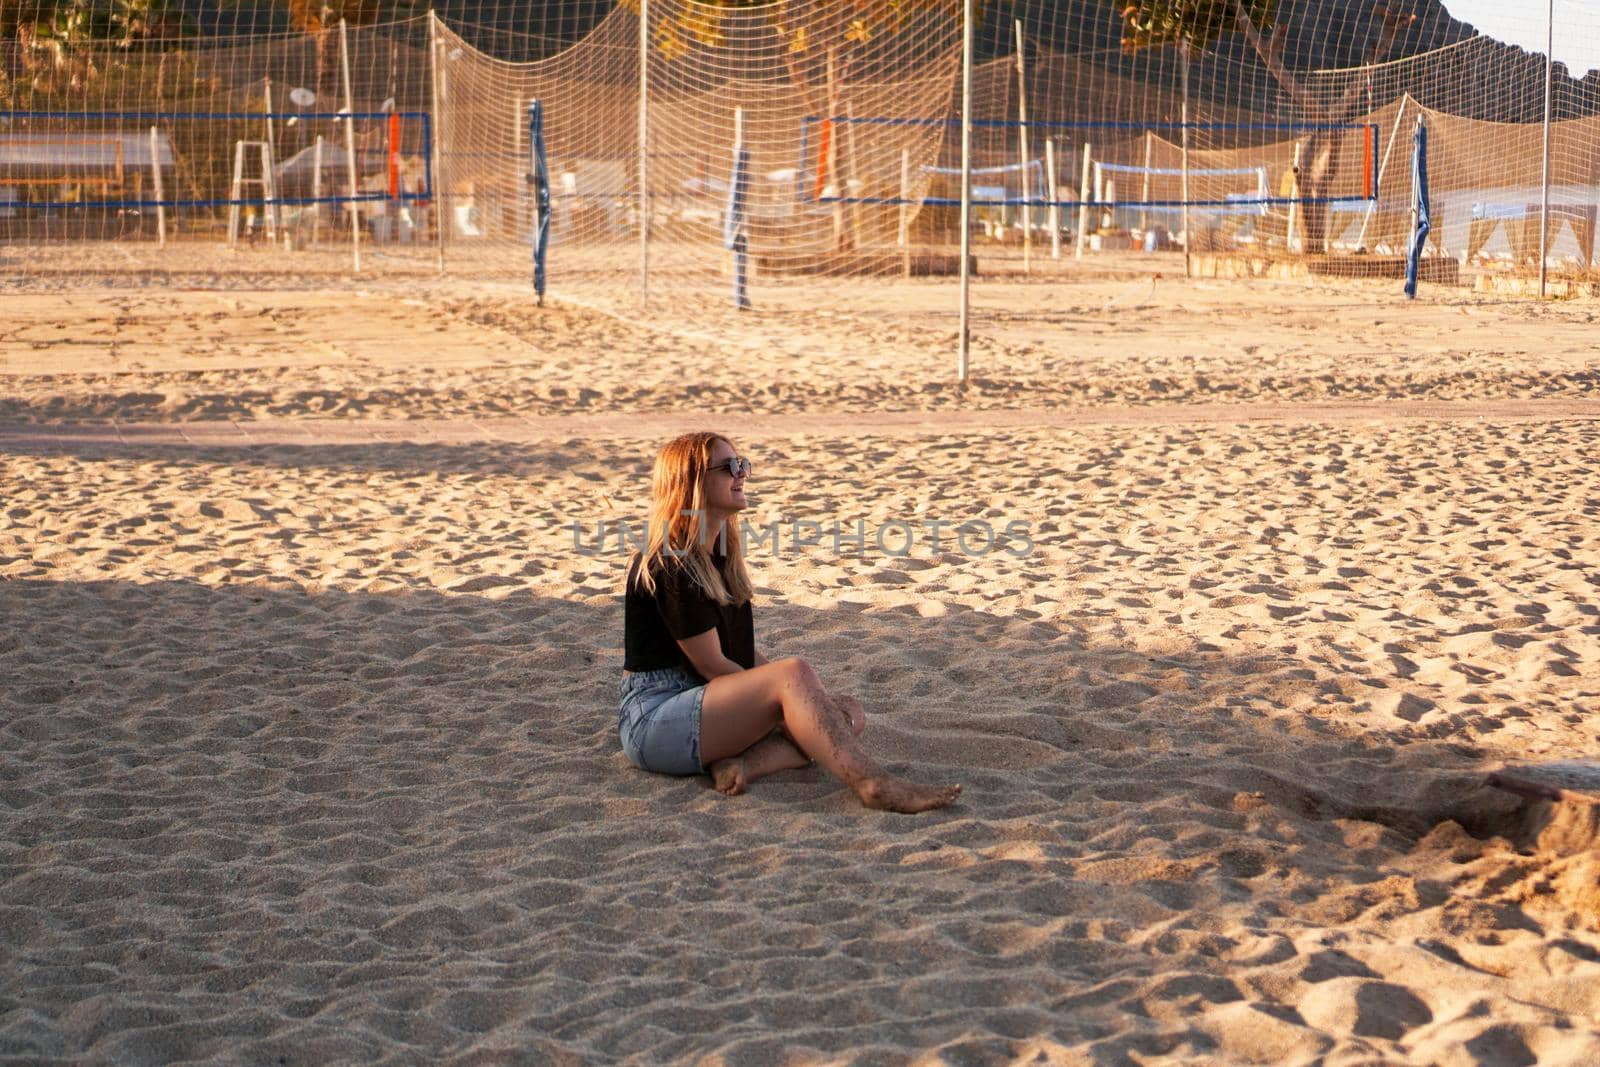 Woman at the summer beach in a hot day. Nearby there are palm trees and a sports volleyball court.